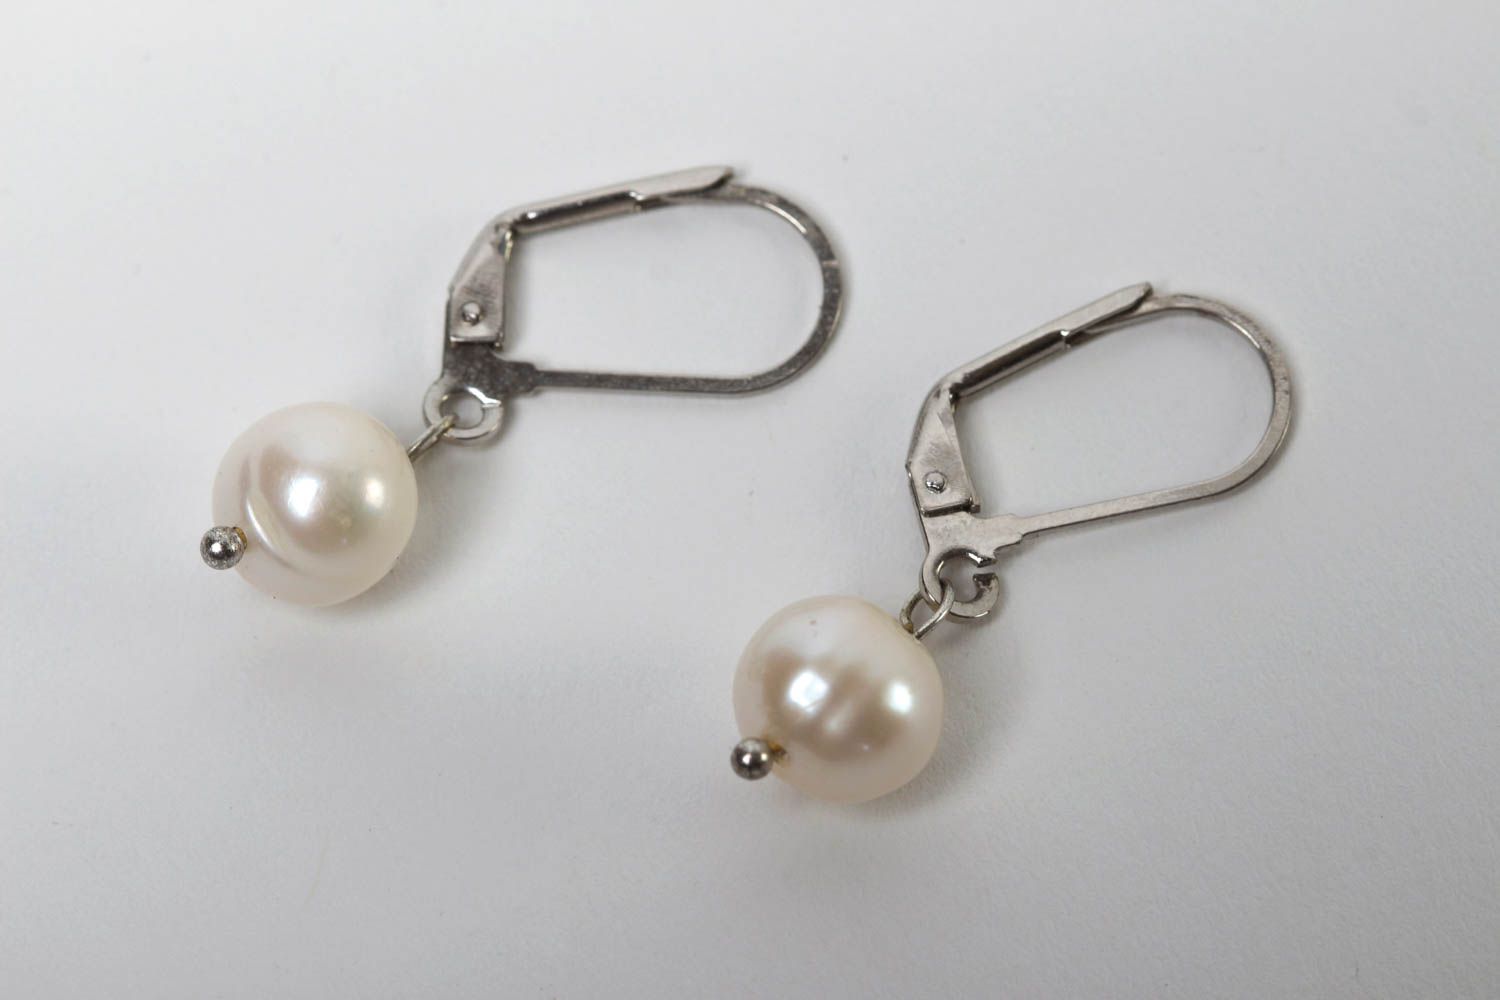 Handmade earrings with pearl beads earrings with charms stylish jewelry photo 2